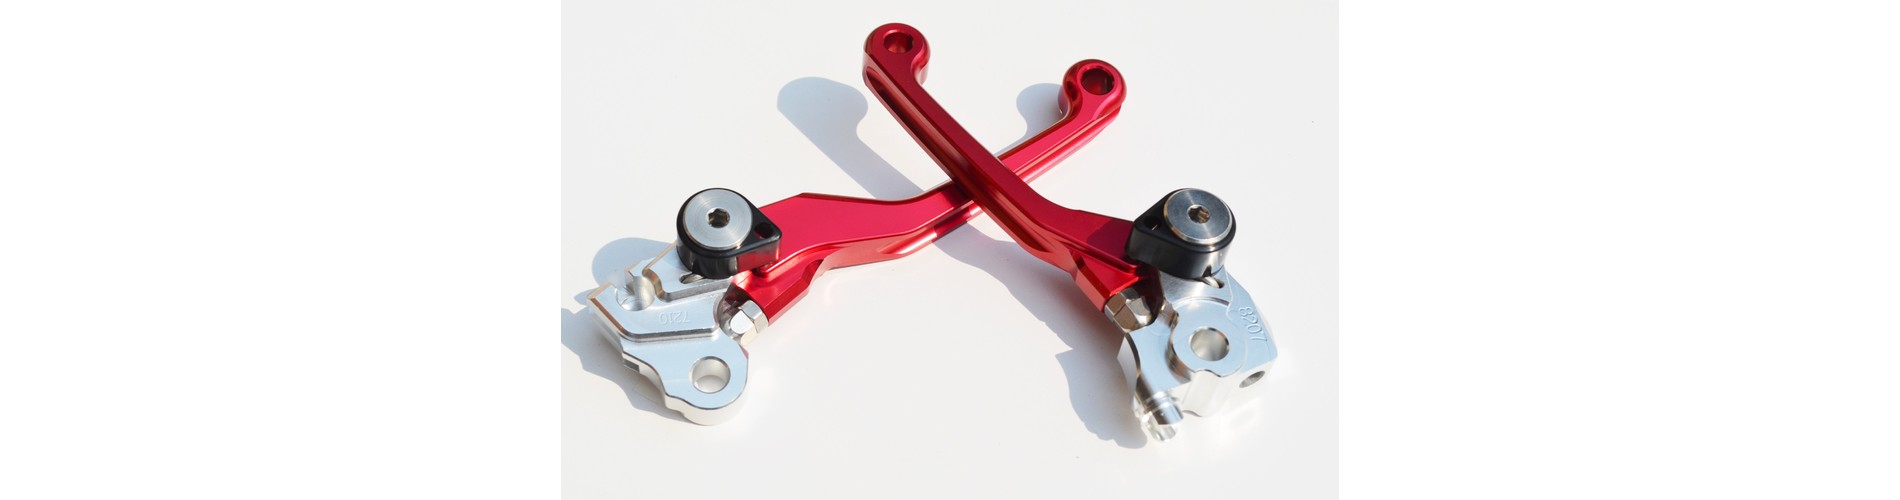 SEE OUR COMPLETE RANGE OF LEVERS